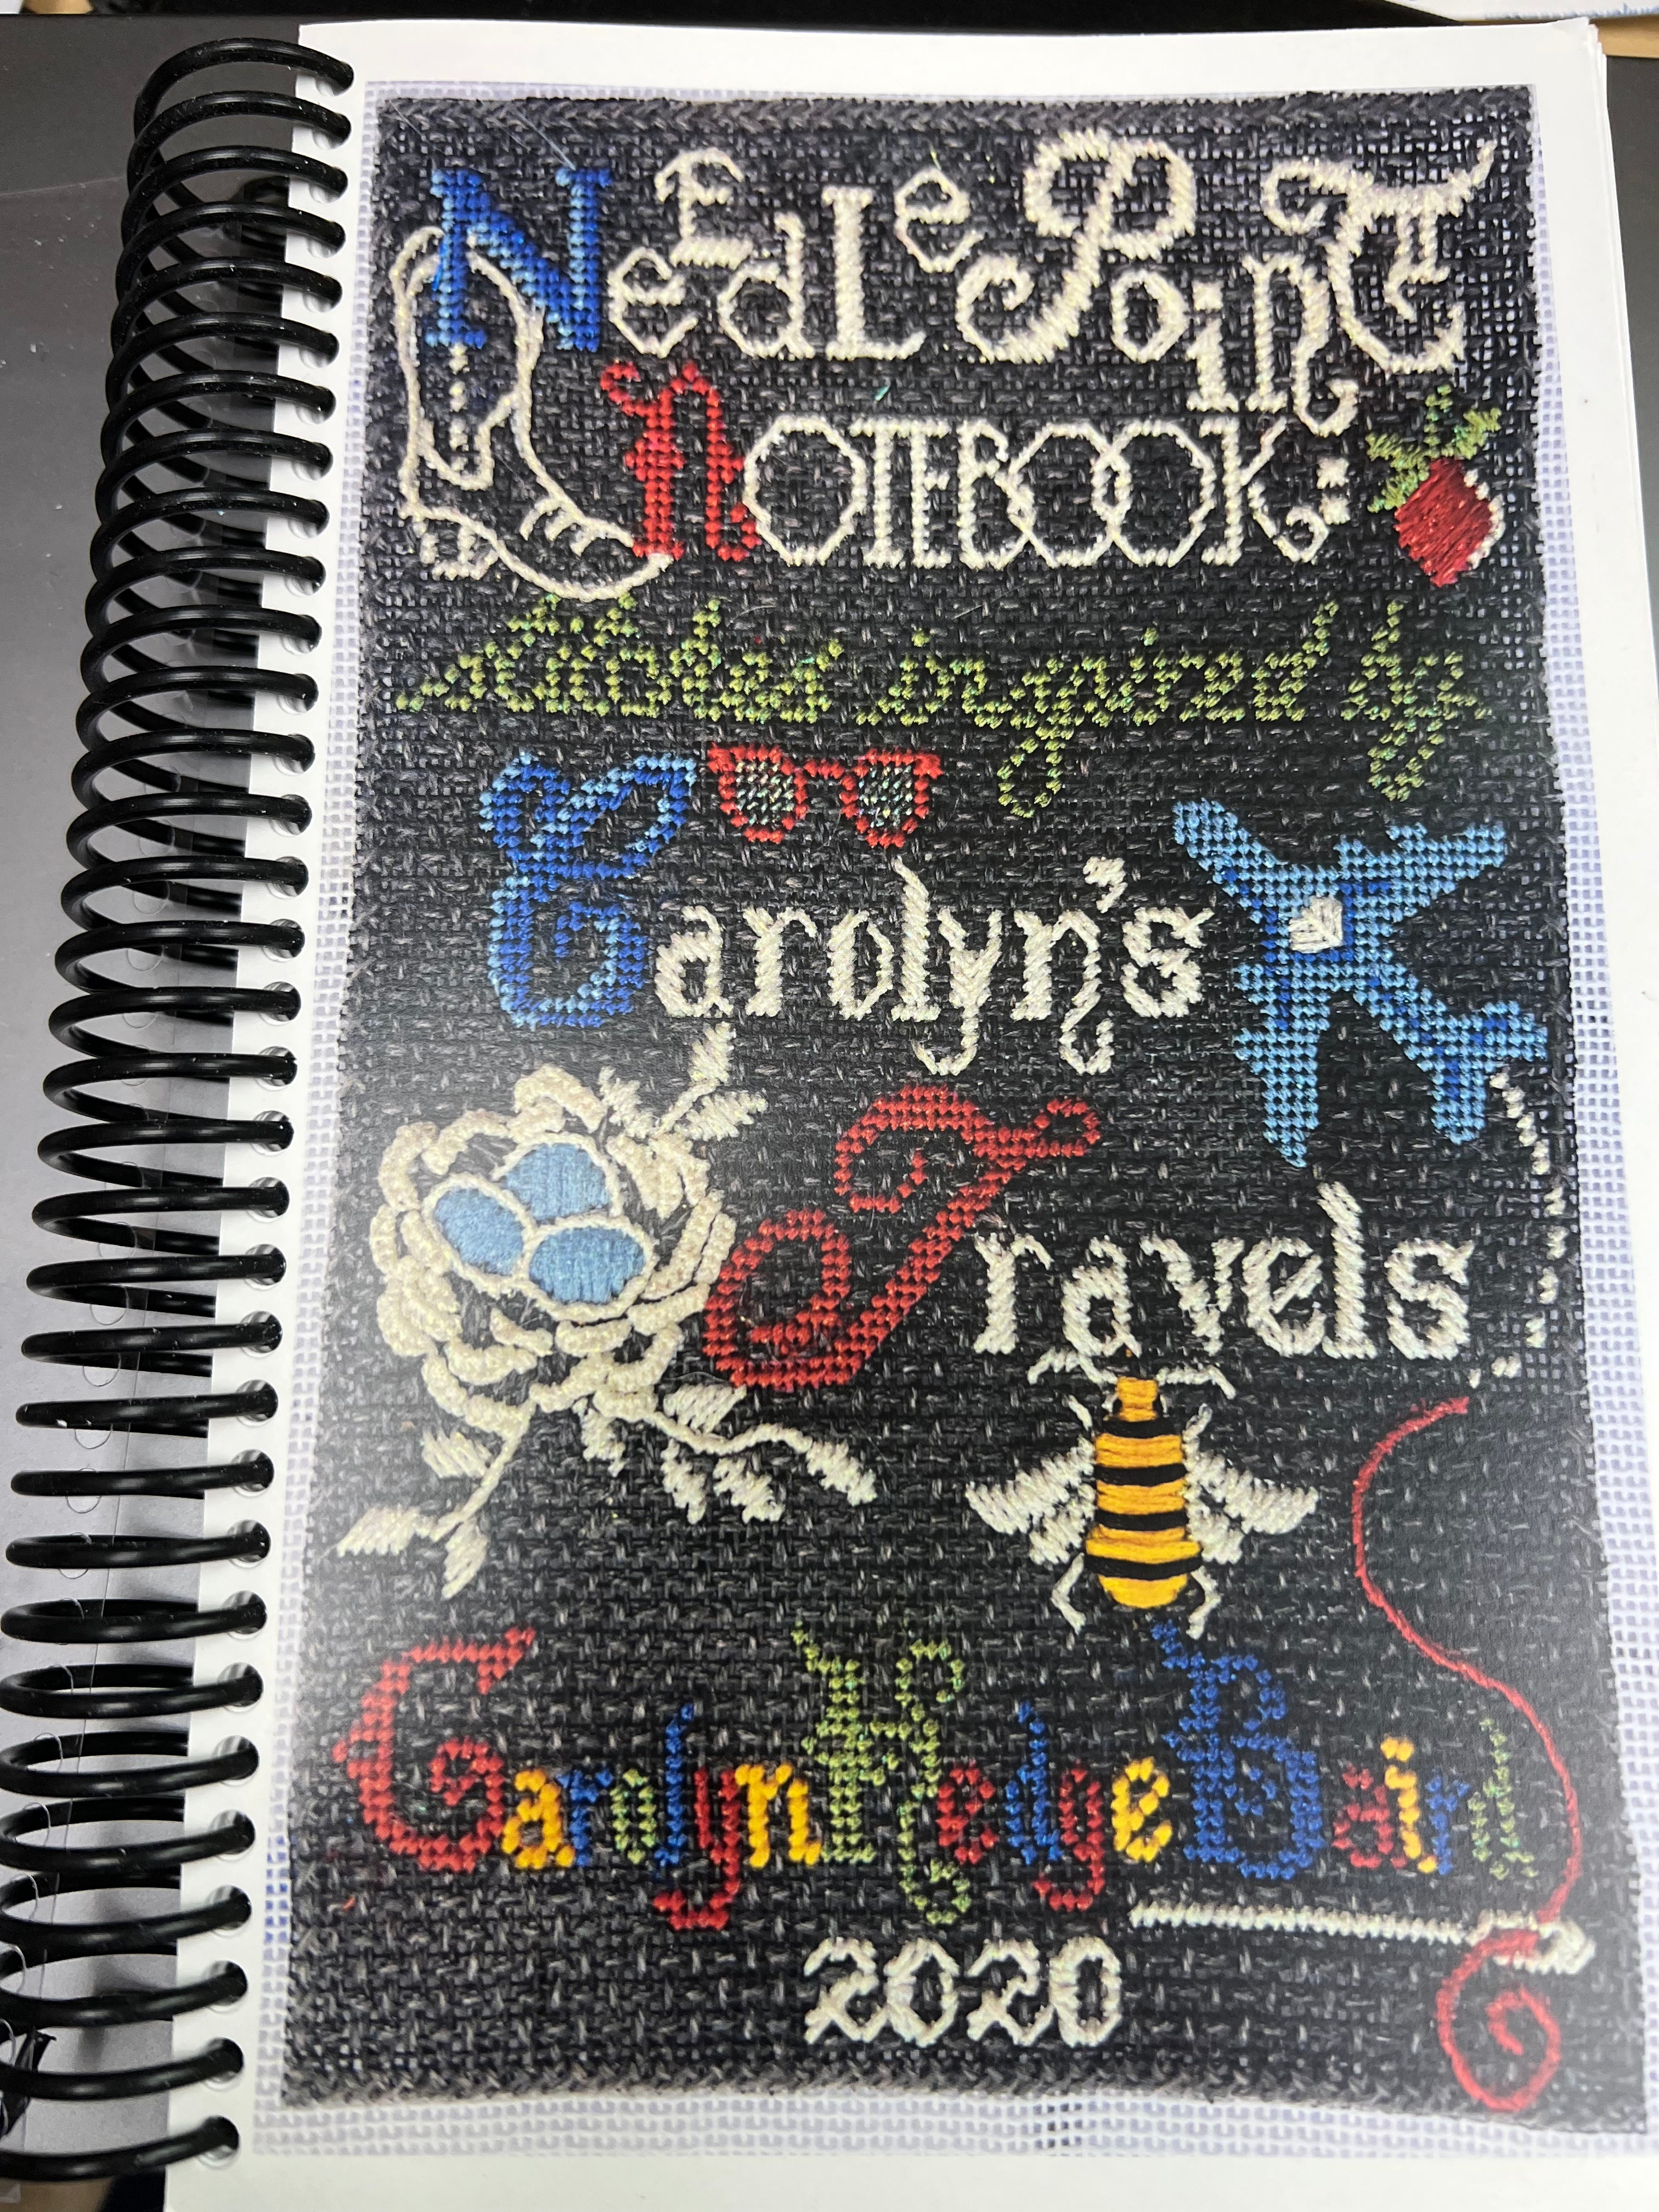 Needlepoint Notebook-Carolyn's Travels by Carolyn Hedge Baird